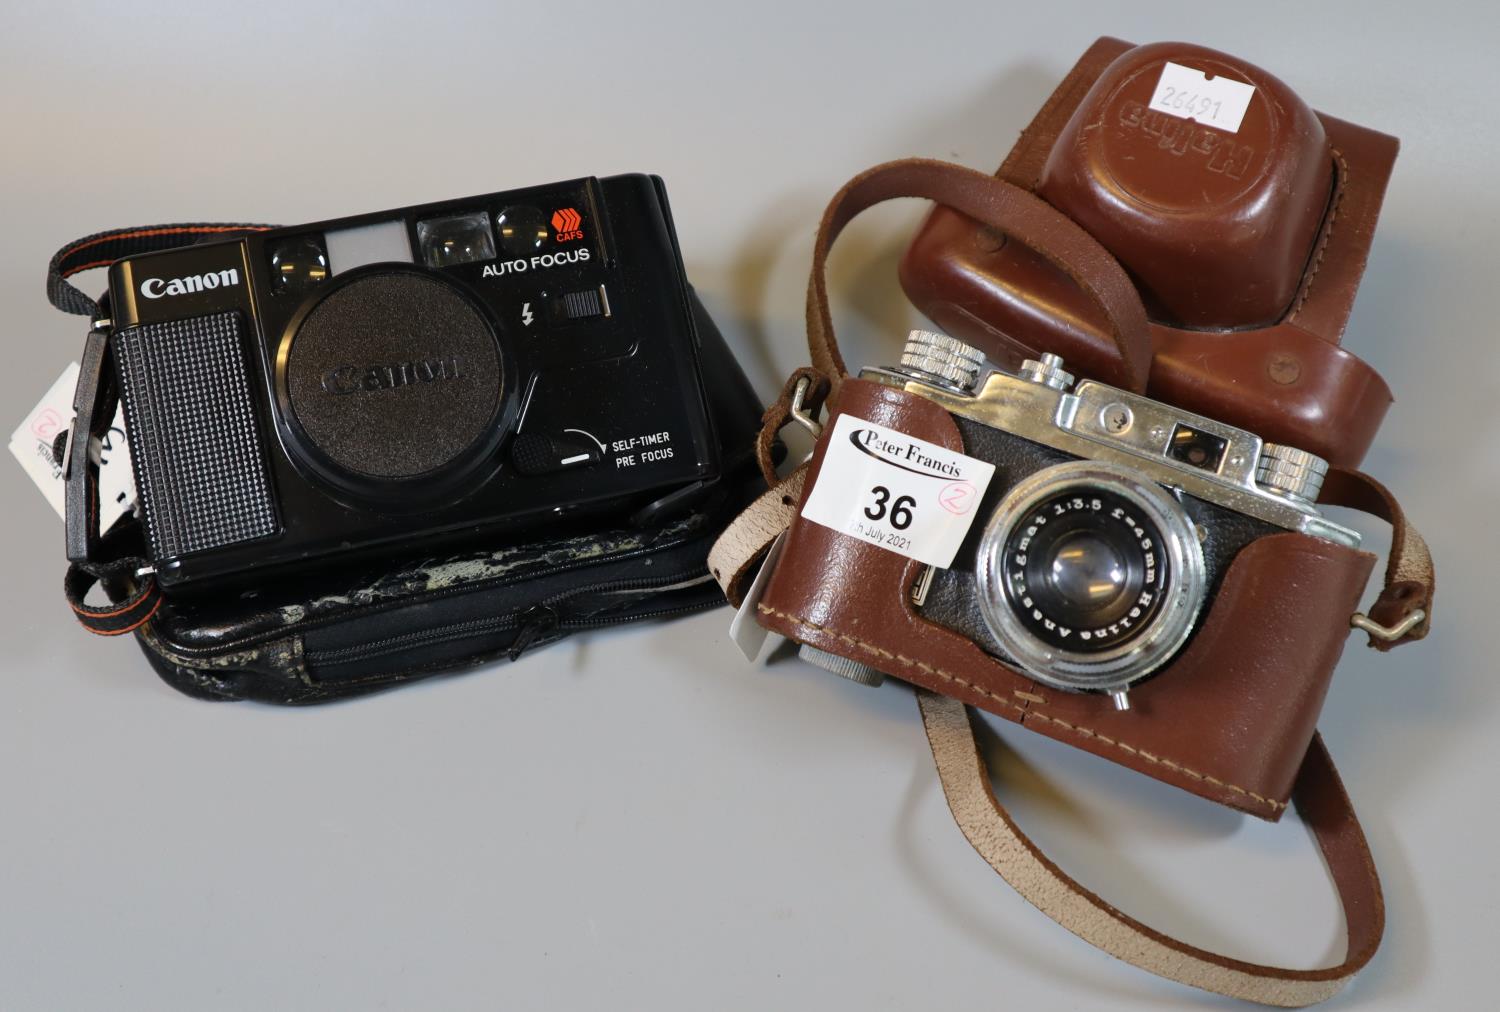 Halina 35mm view finder camera in every ready case, together with a Canon autofocus 35mm compact